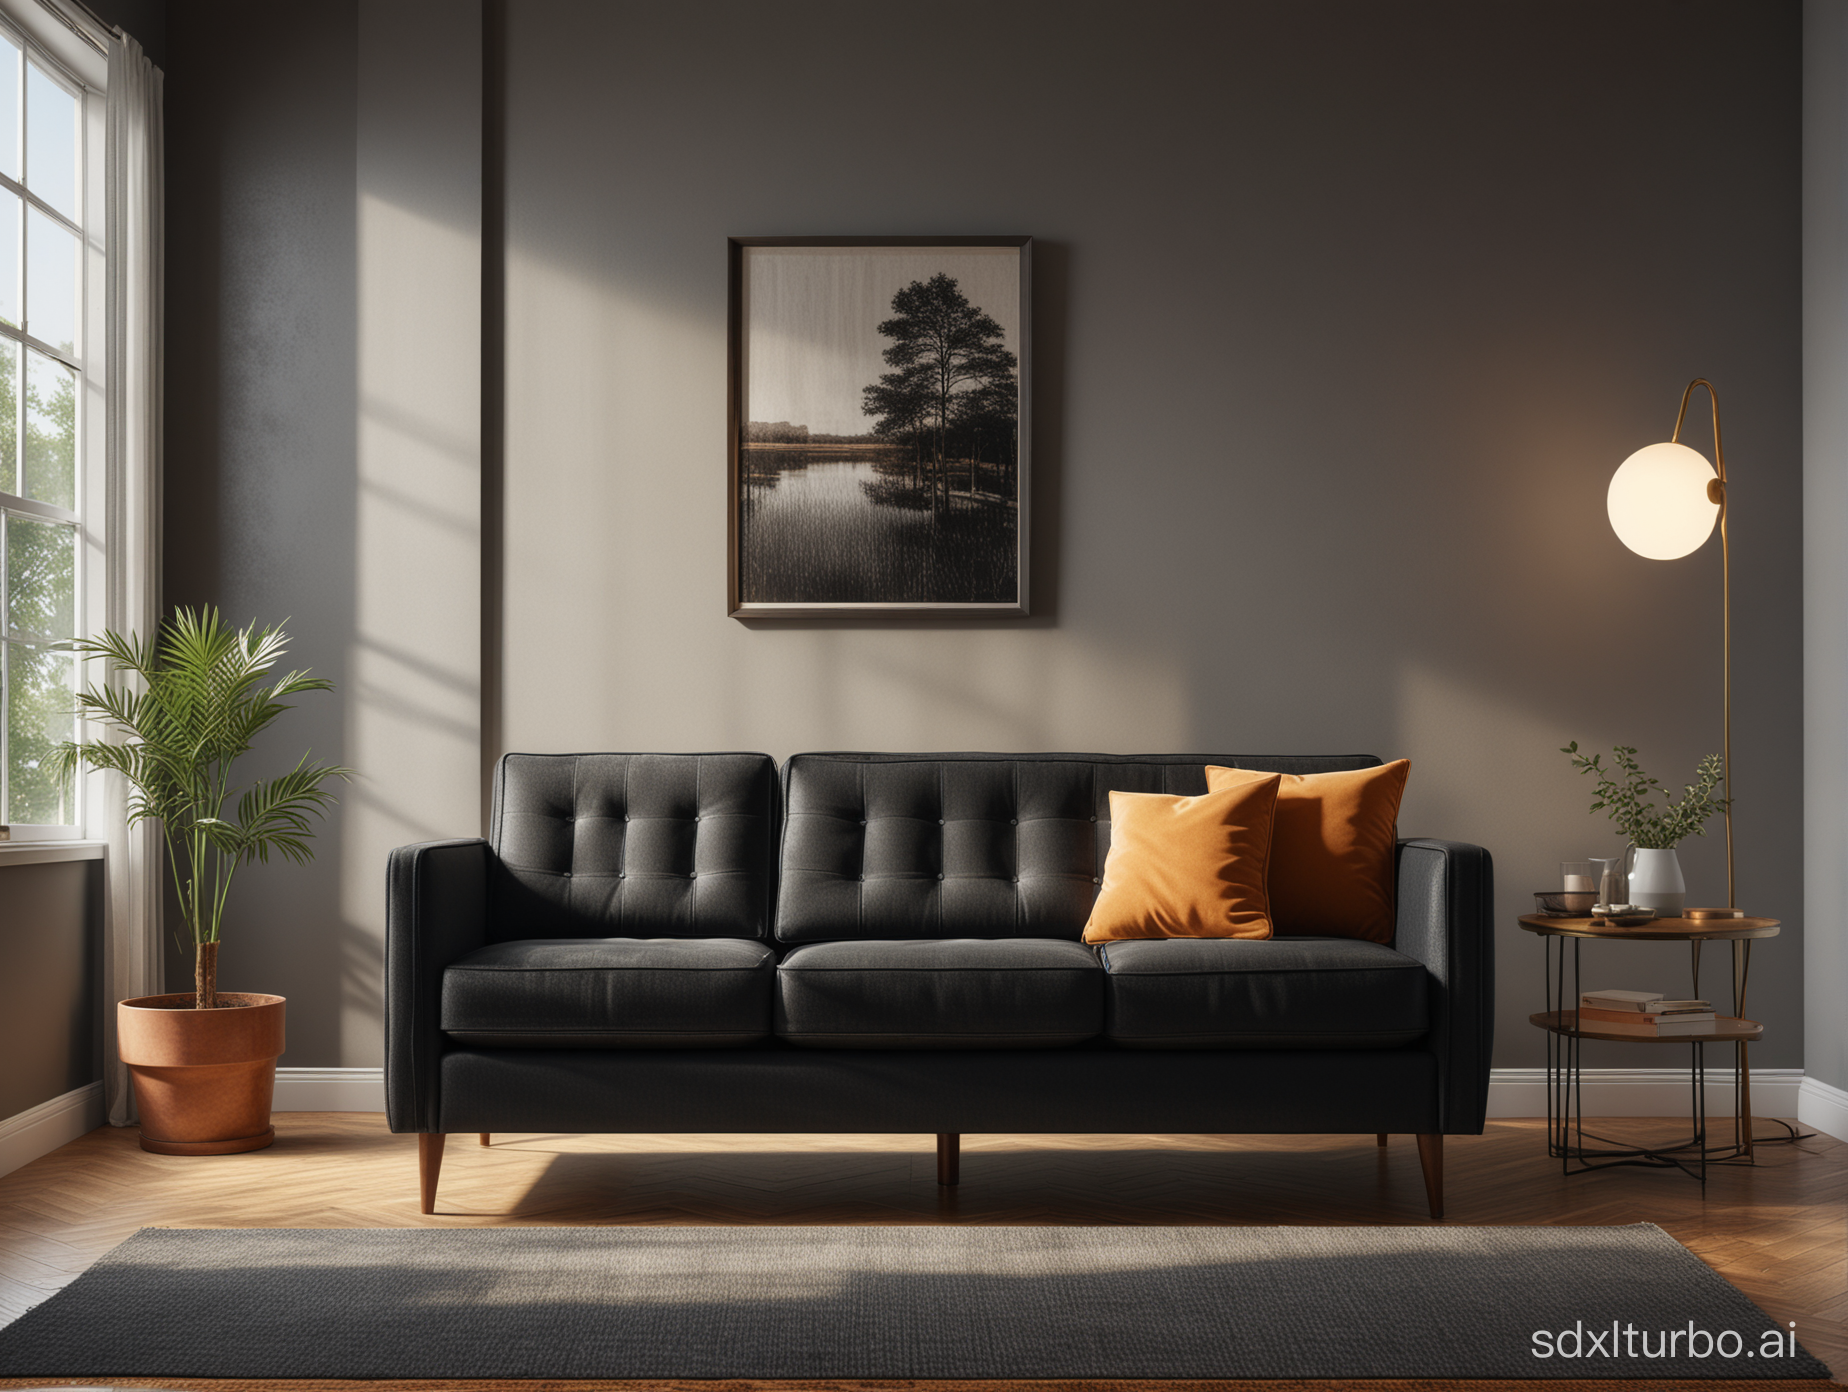 Photography of a black mid century modern couch in a stylish living room with a window on the left side of the image creating a small patch of light while the rest of the room is in shadow. Cinematic style with wide angle lens. Photorealistic.